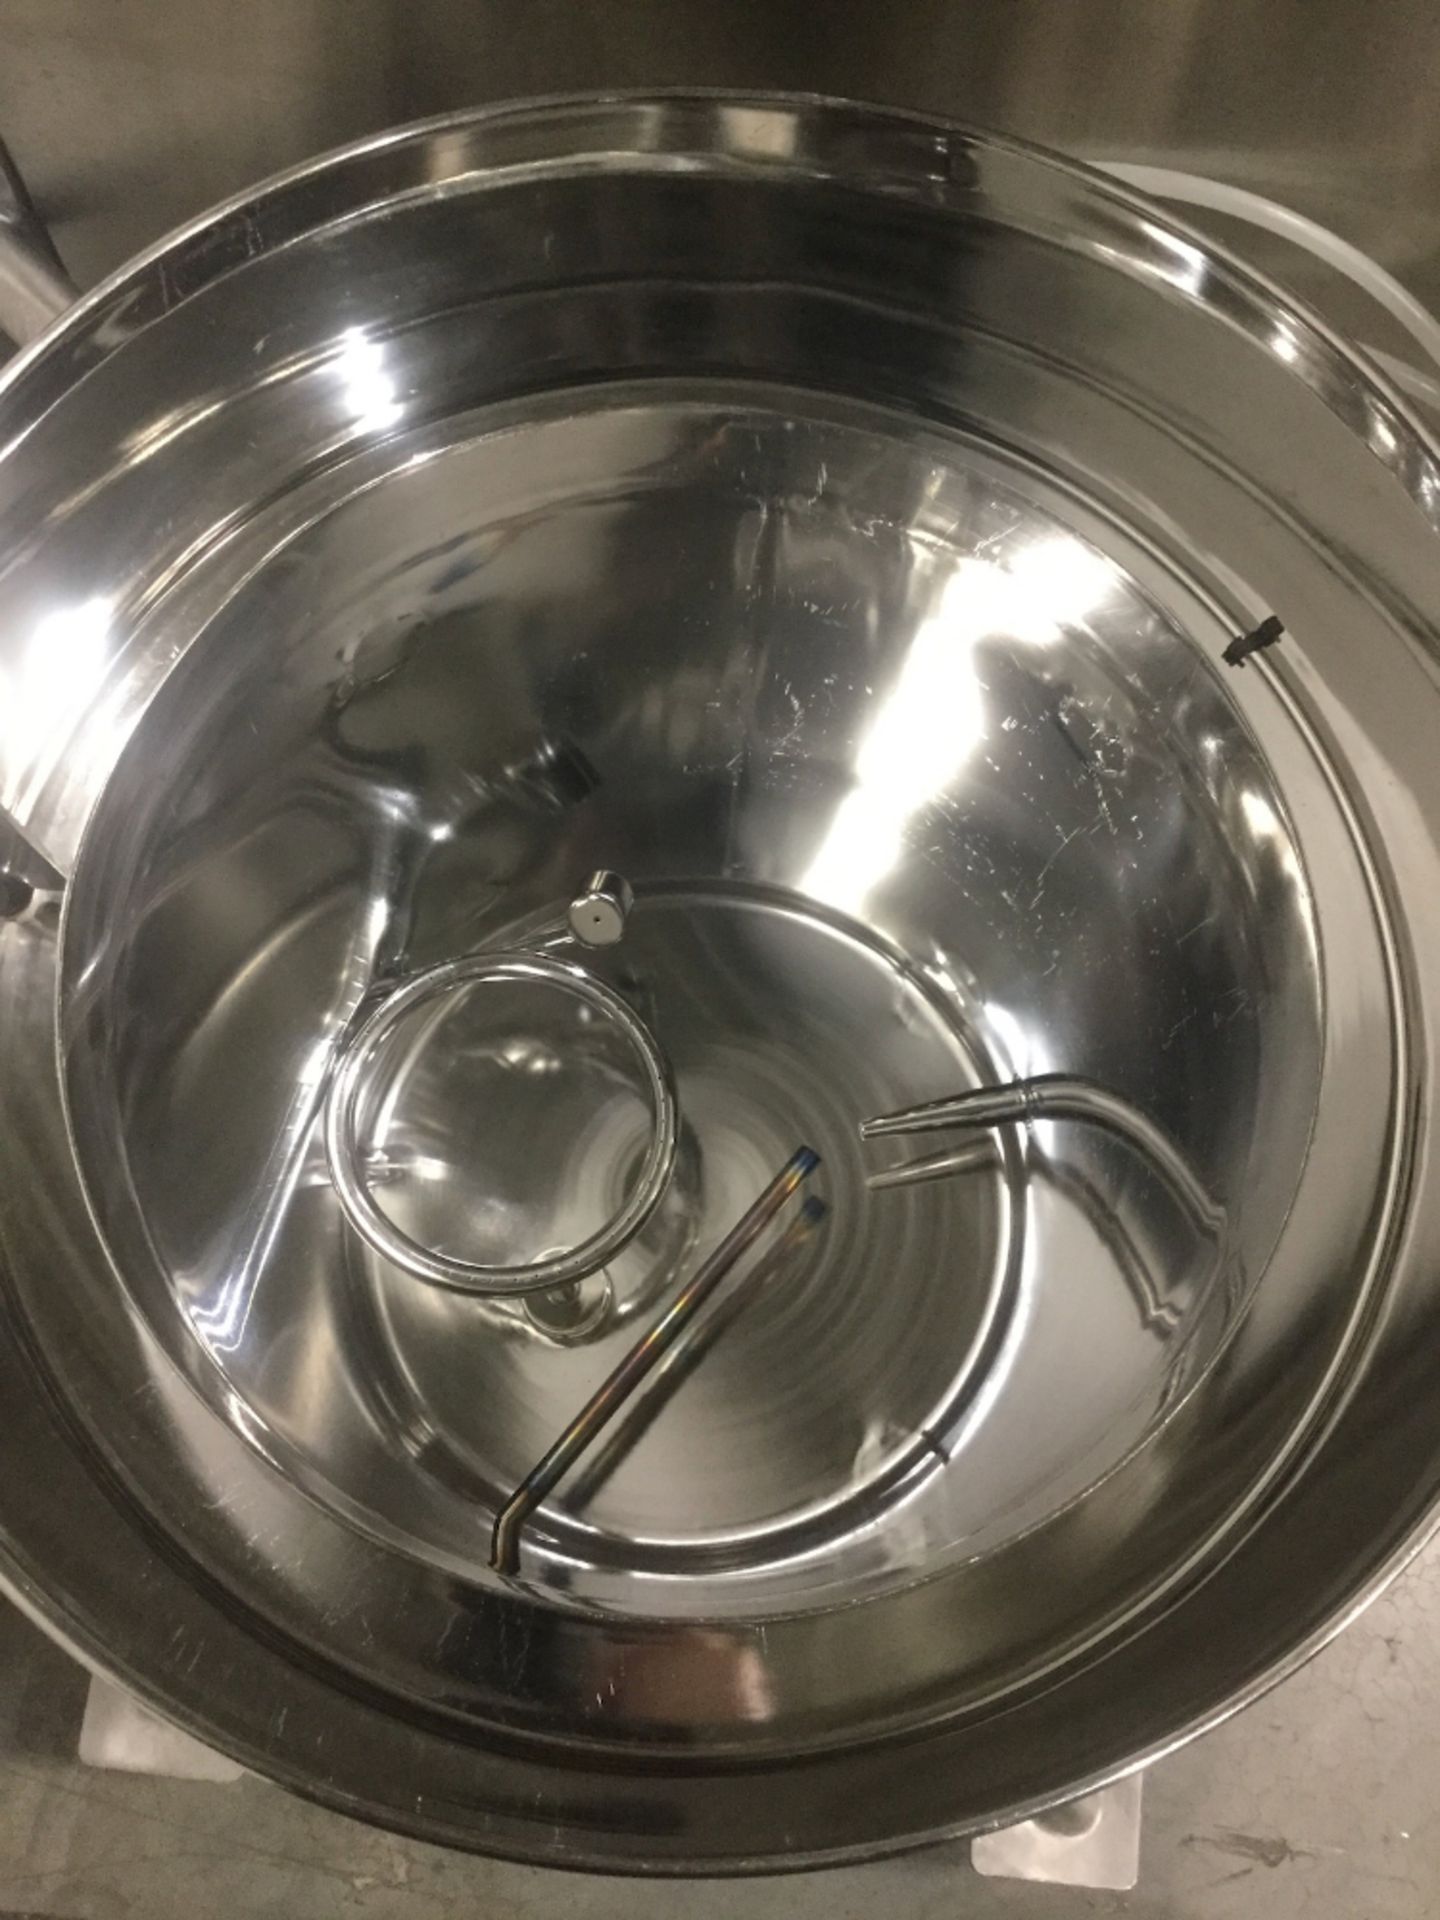 DCI 12 Gallon Stainless Steel Stopper Washer - Image 5 of 7